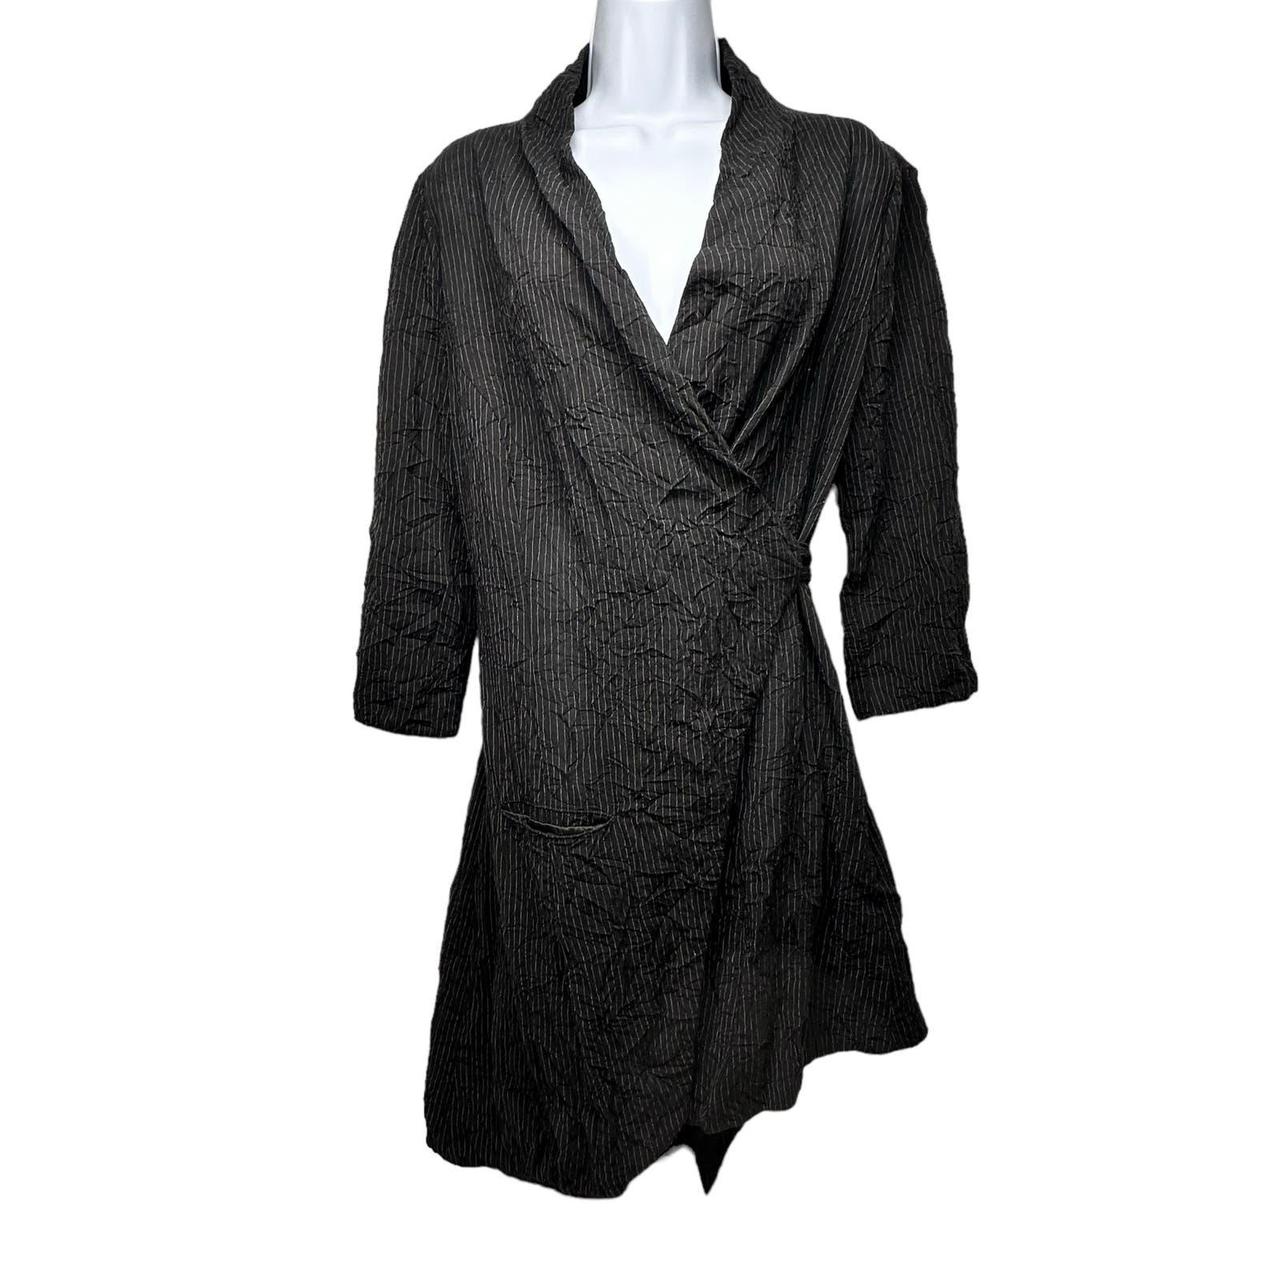 Anett Rostel Duster Jacket Size 40 / USA M/8 Pin... - Depop